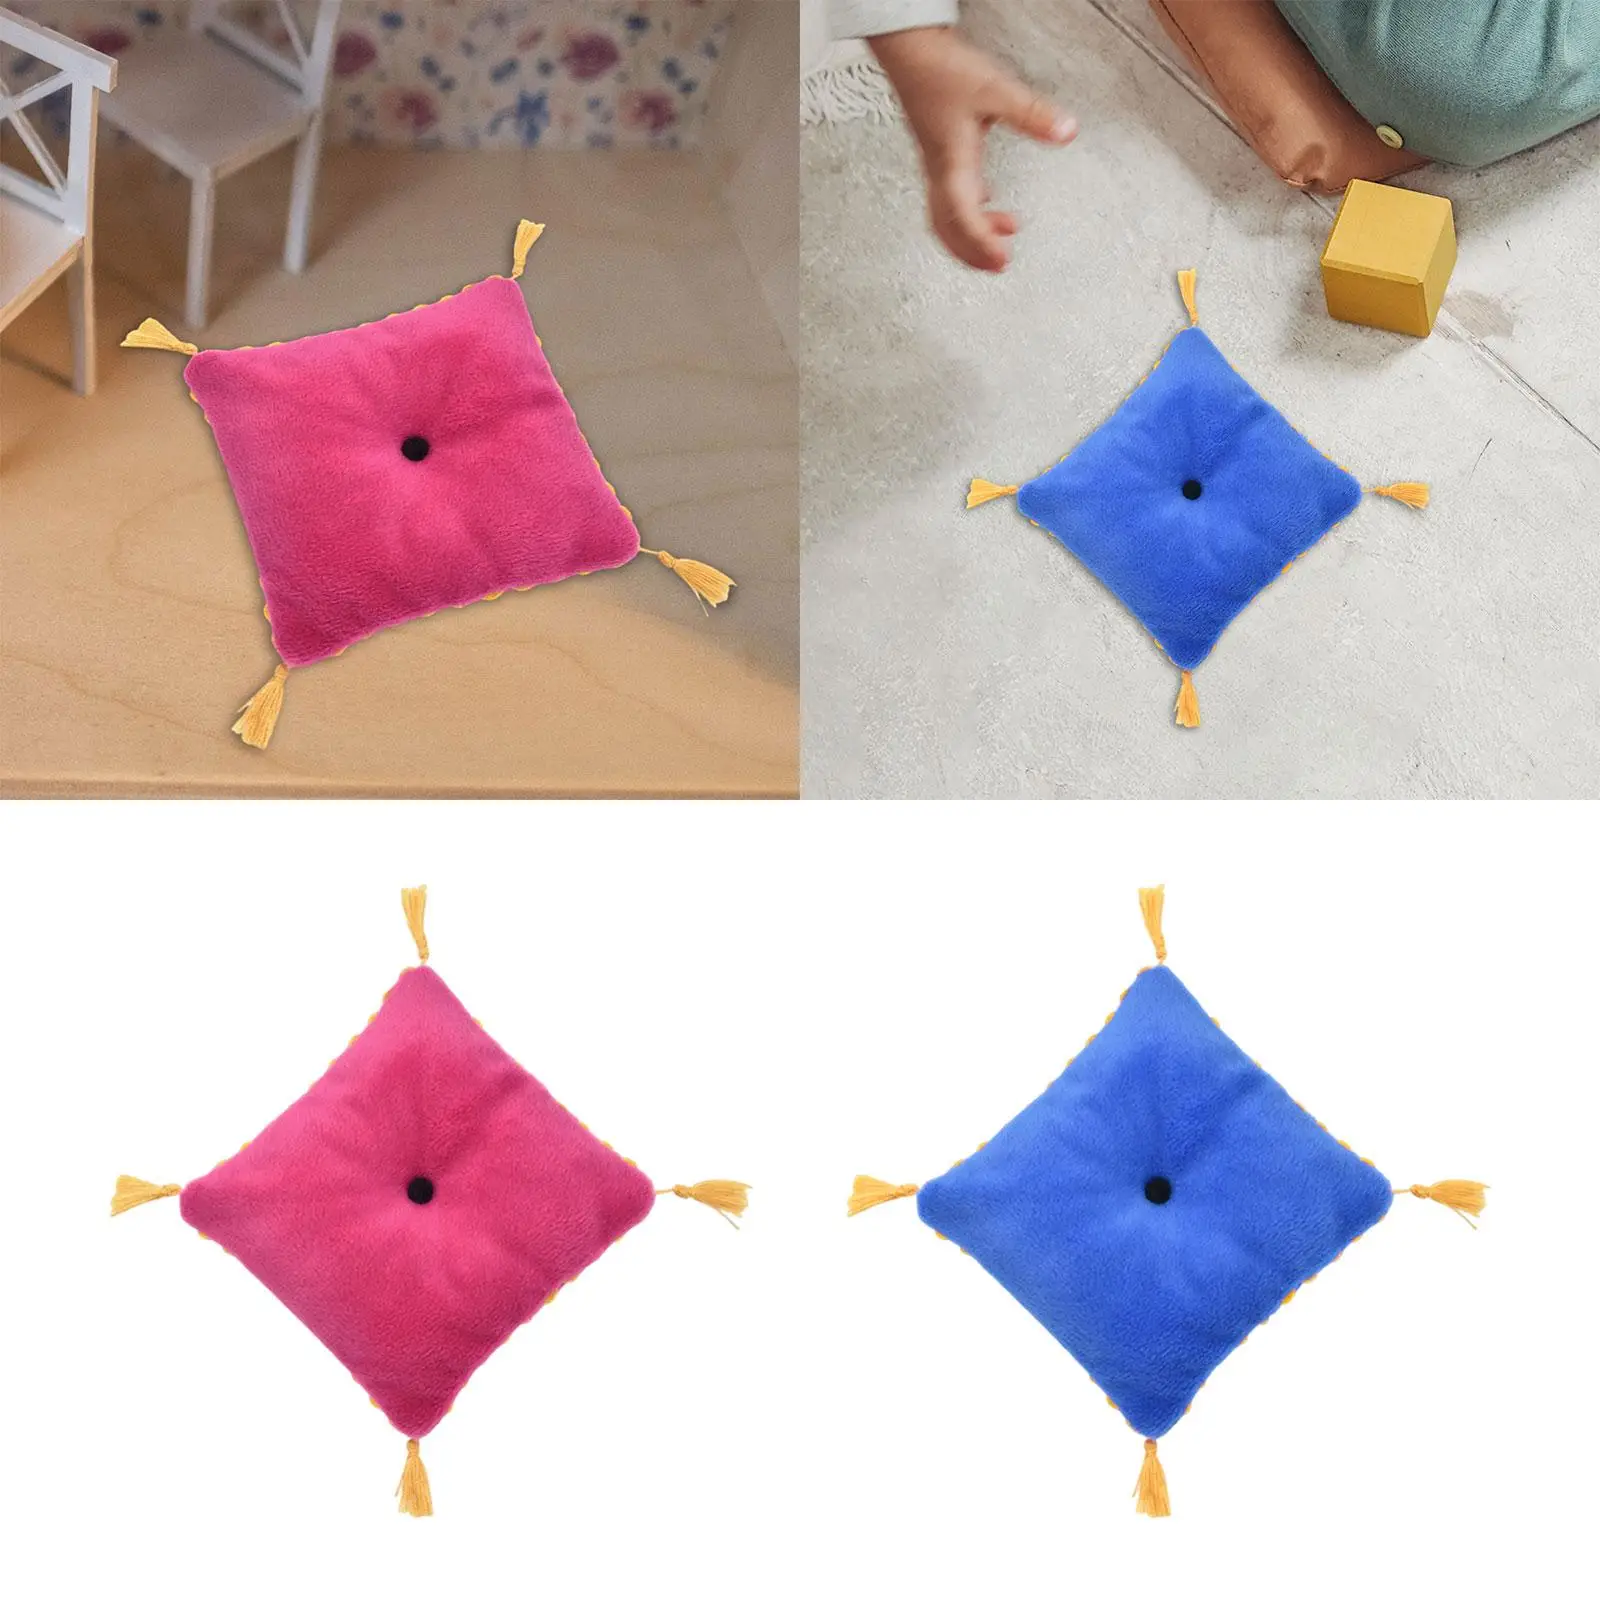 1:6 Scale Dollhouse Pillow Accessories DIY Craft Dollhouse Furniture Miniature Furniture Accessory for Girls Boys Holiday Gifts